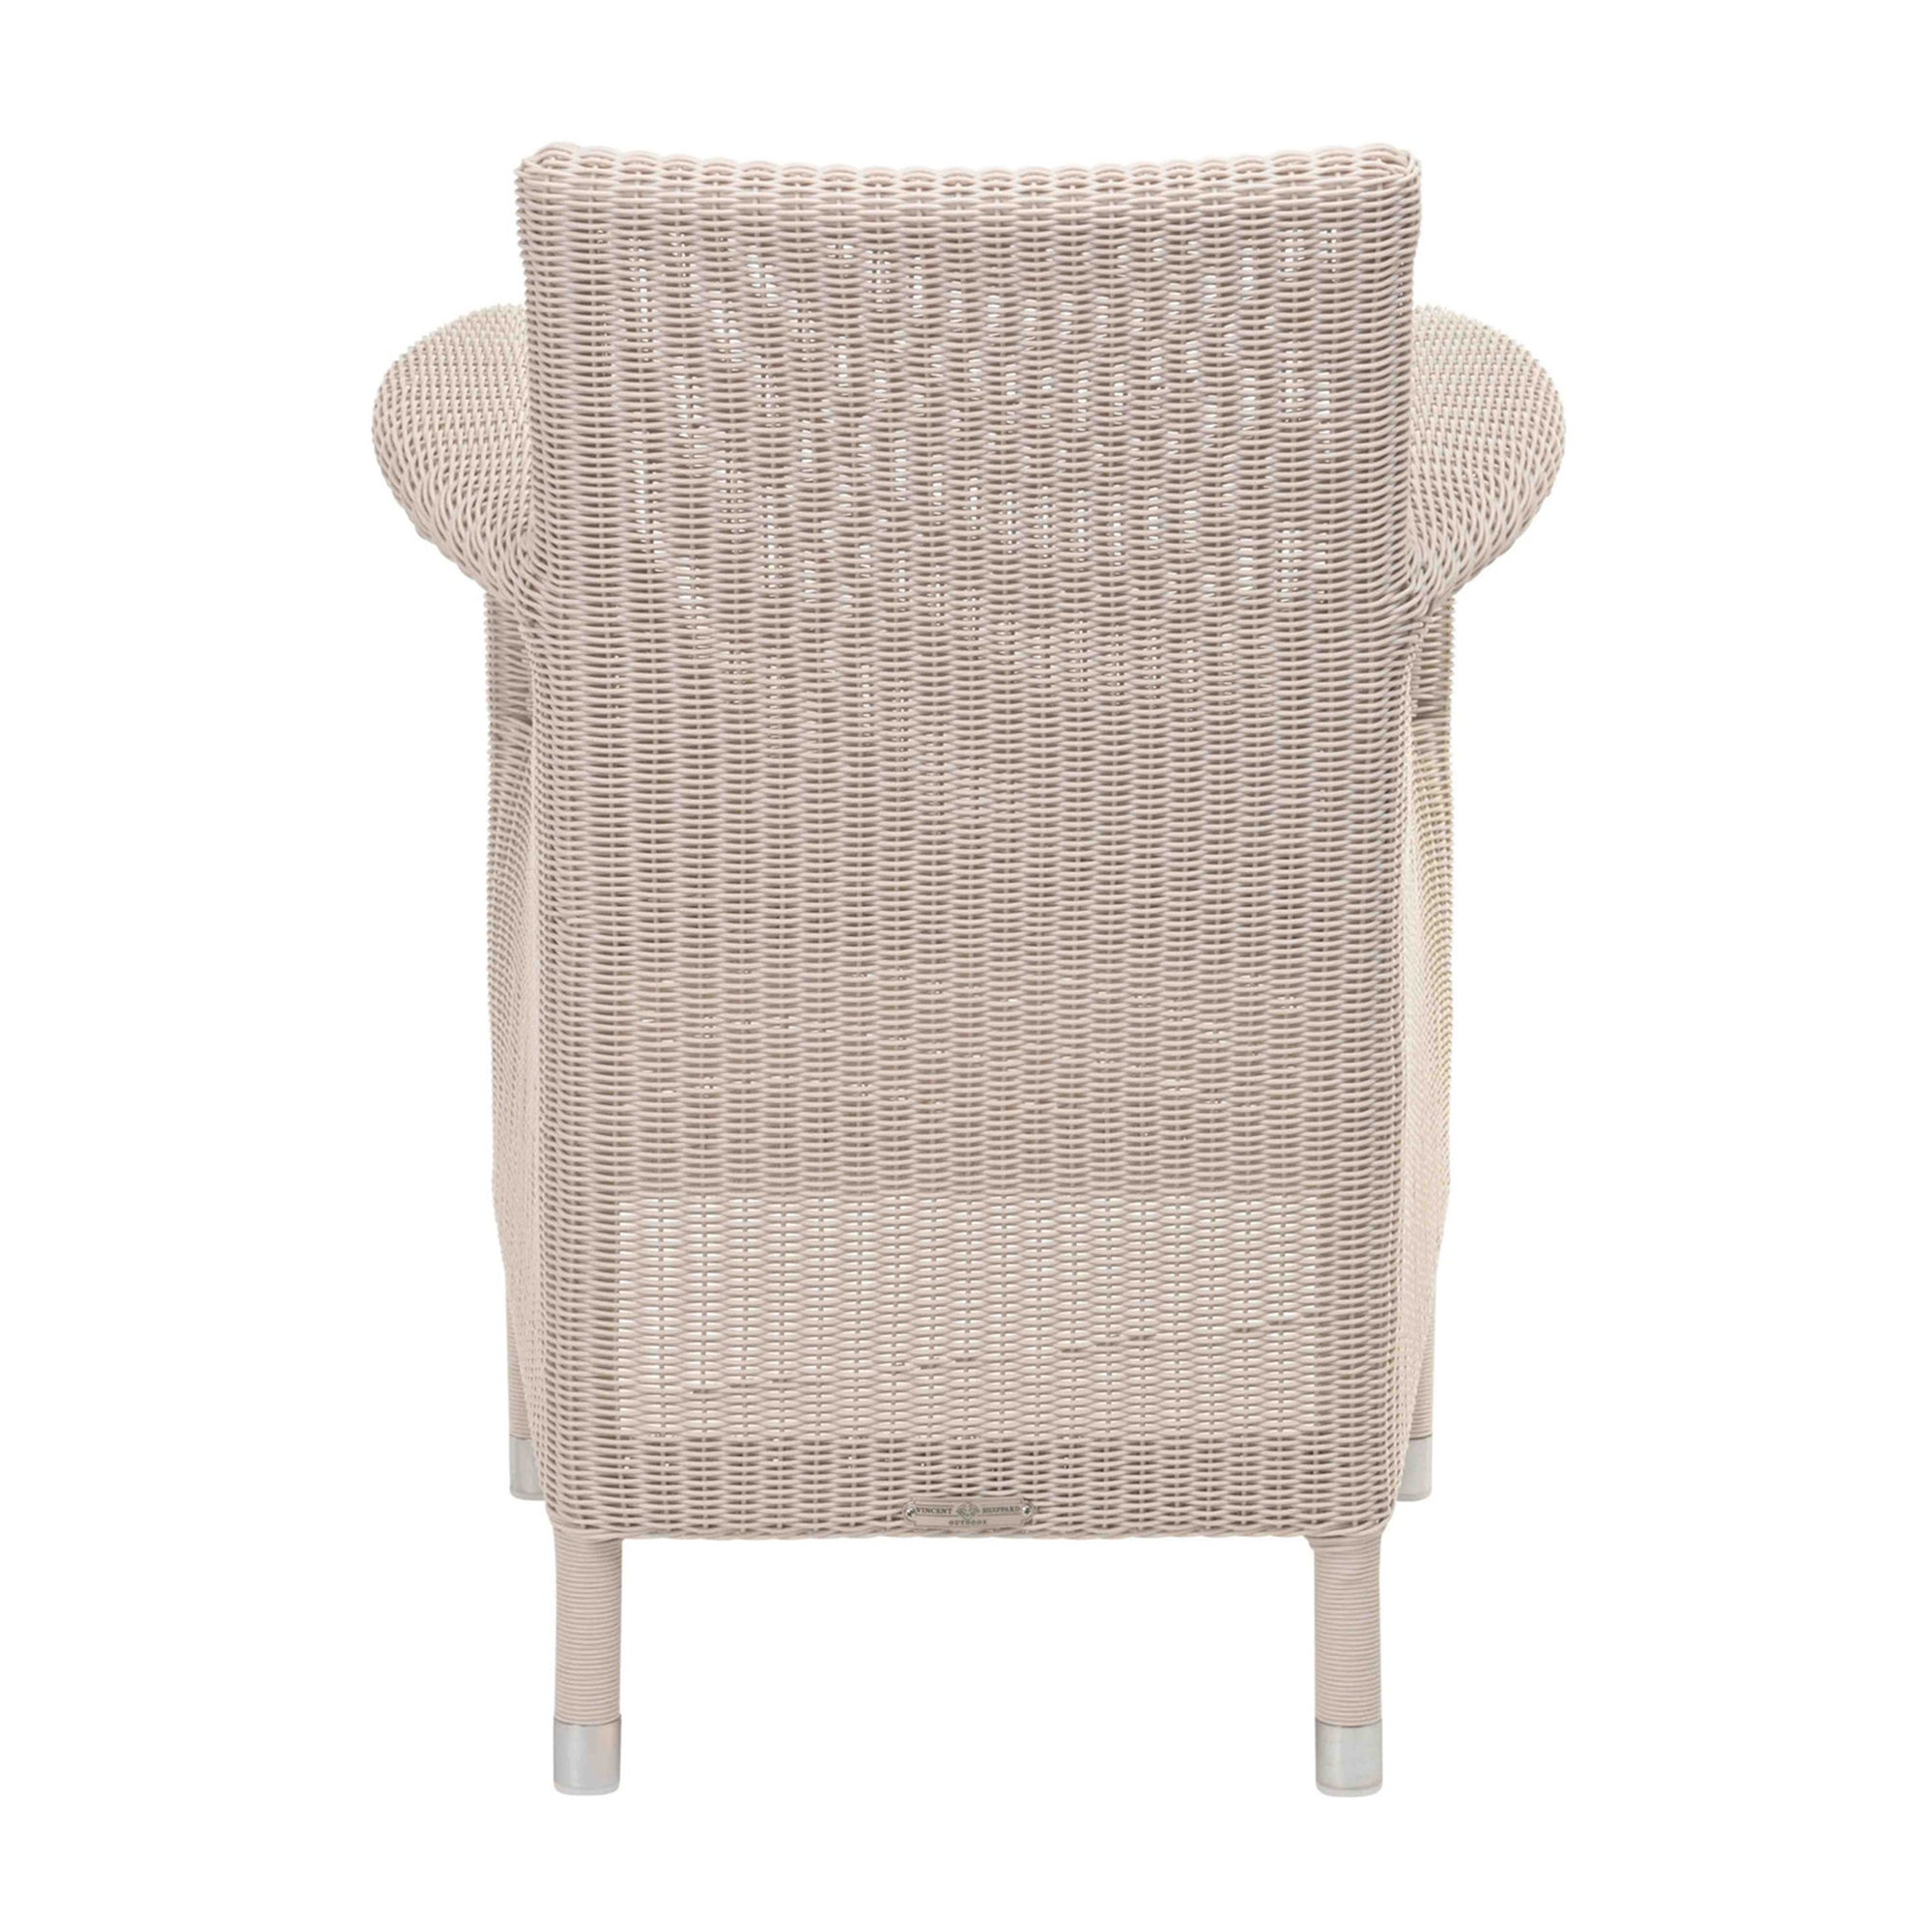 Safi Outdoor Dining Chair